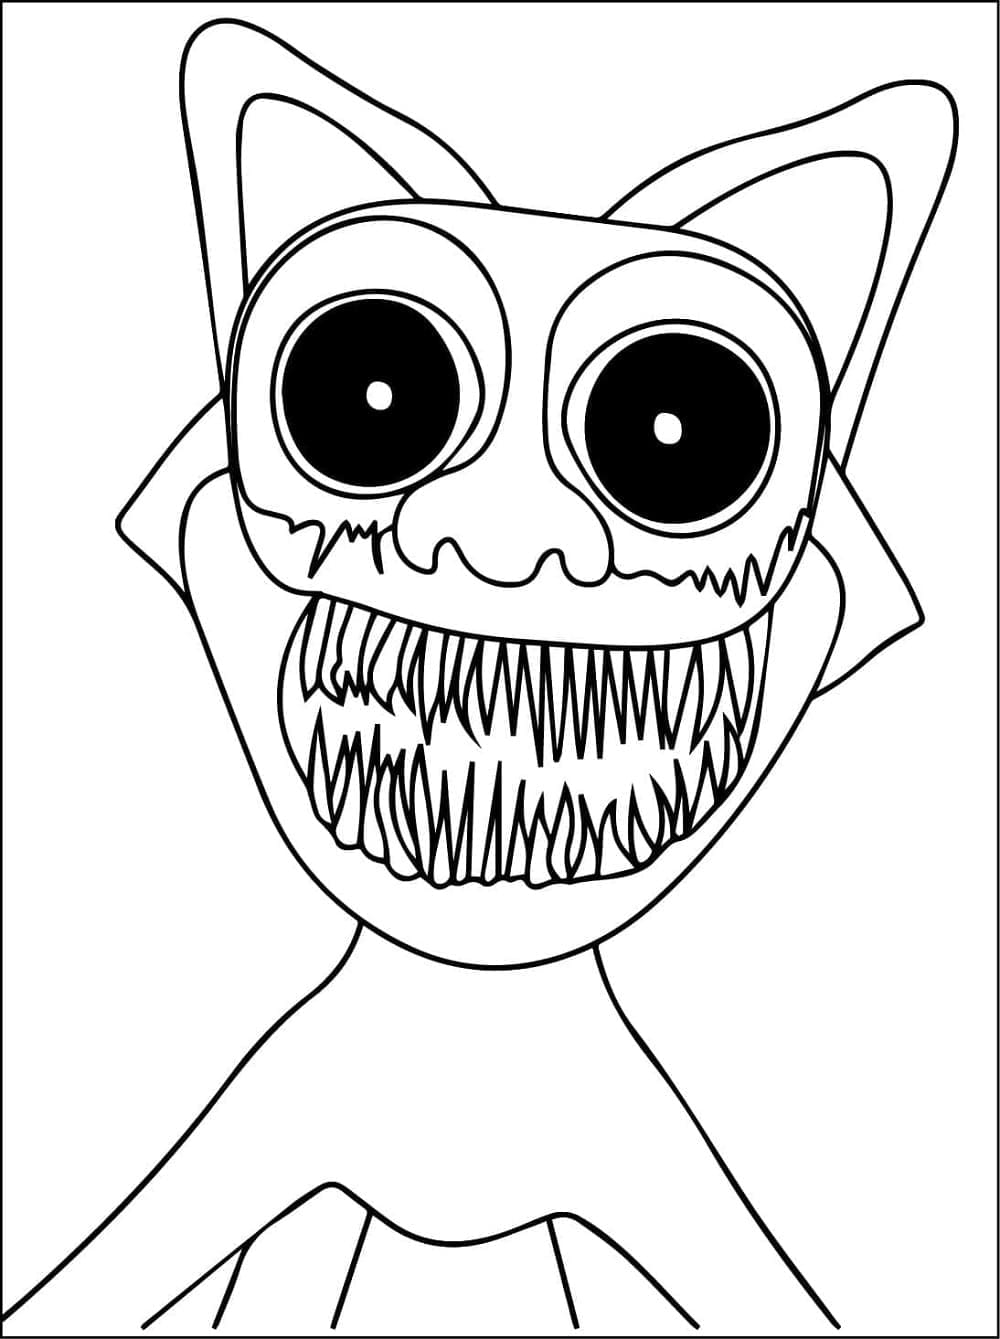 Printable Zoonomaly Smile Cat Coloring Page